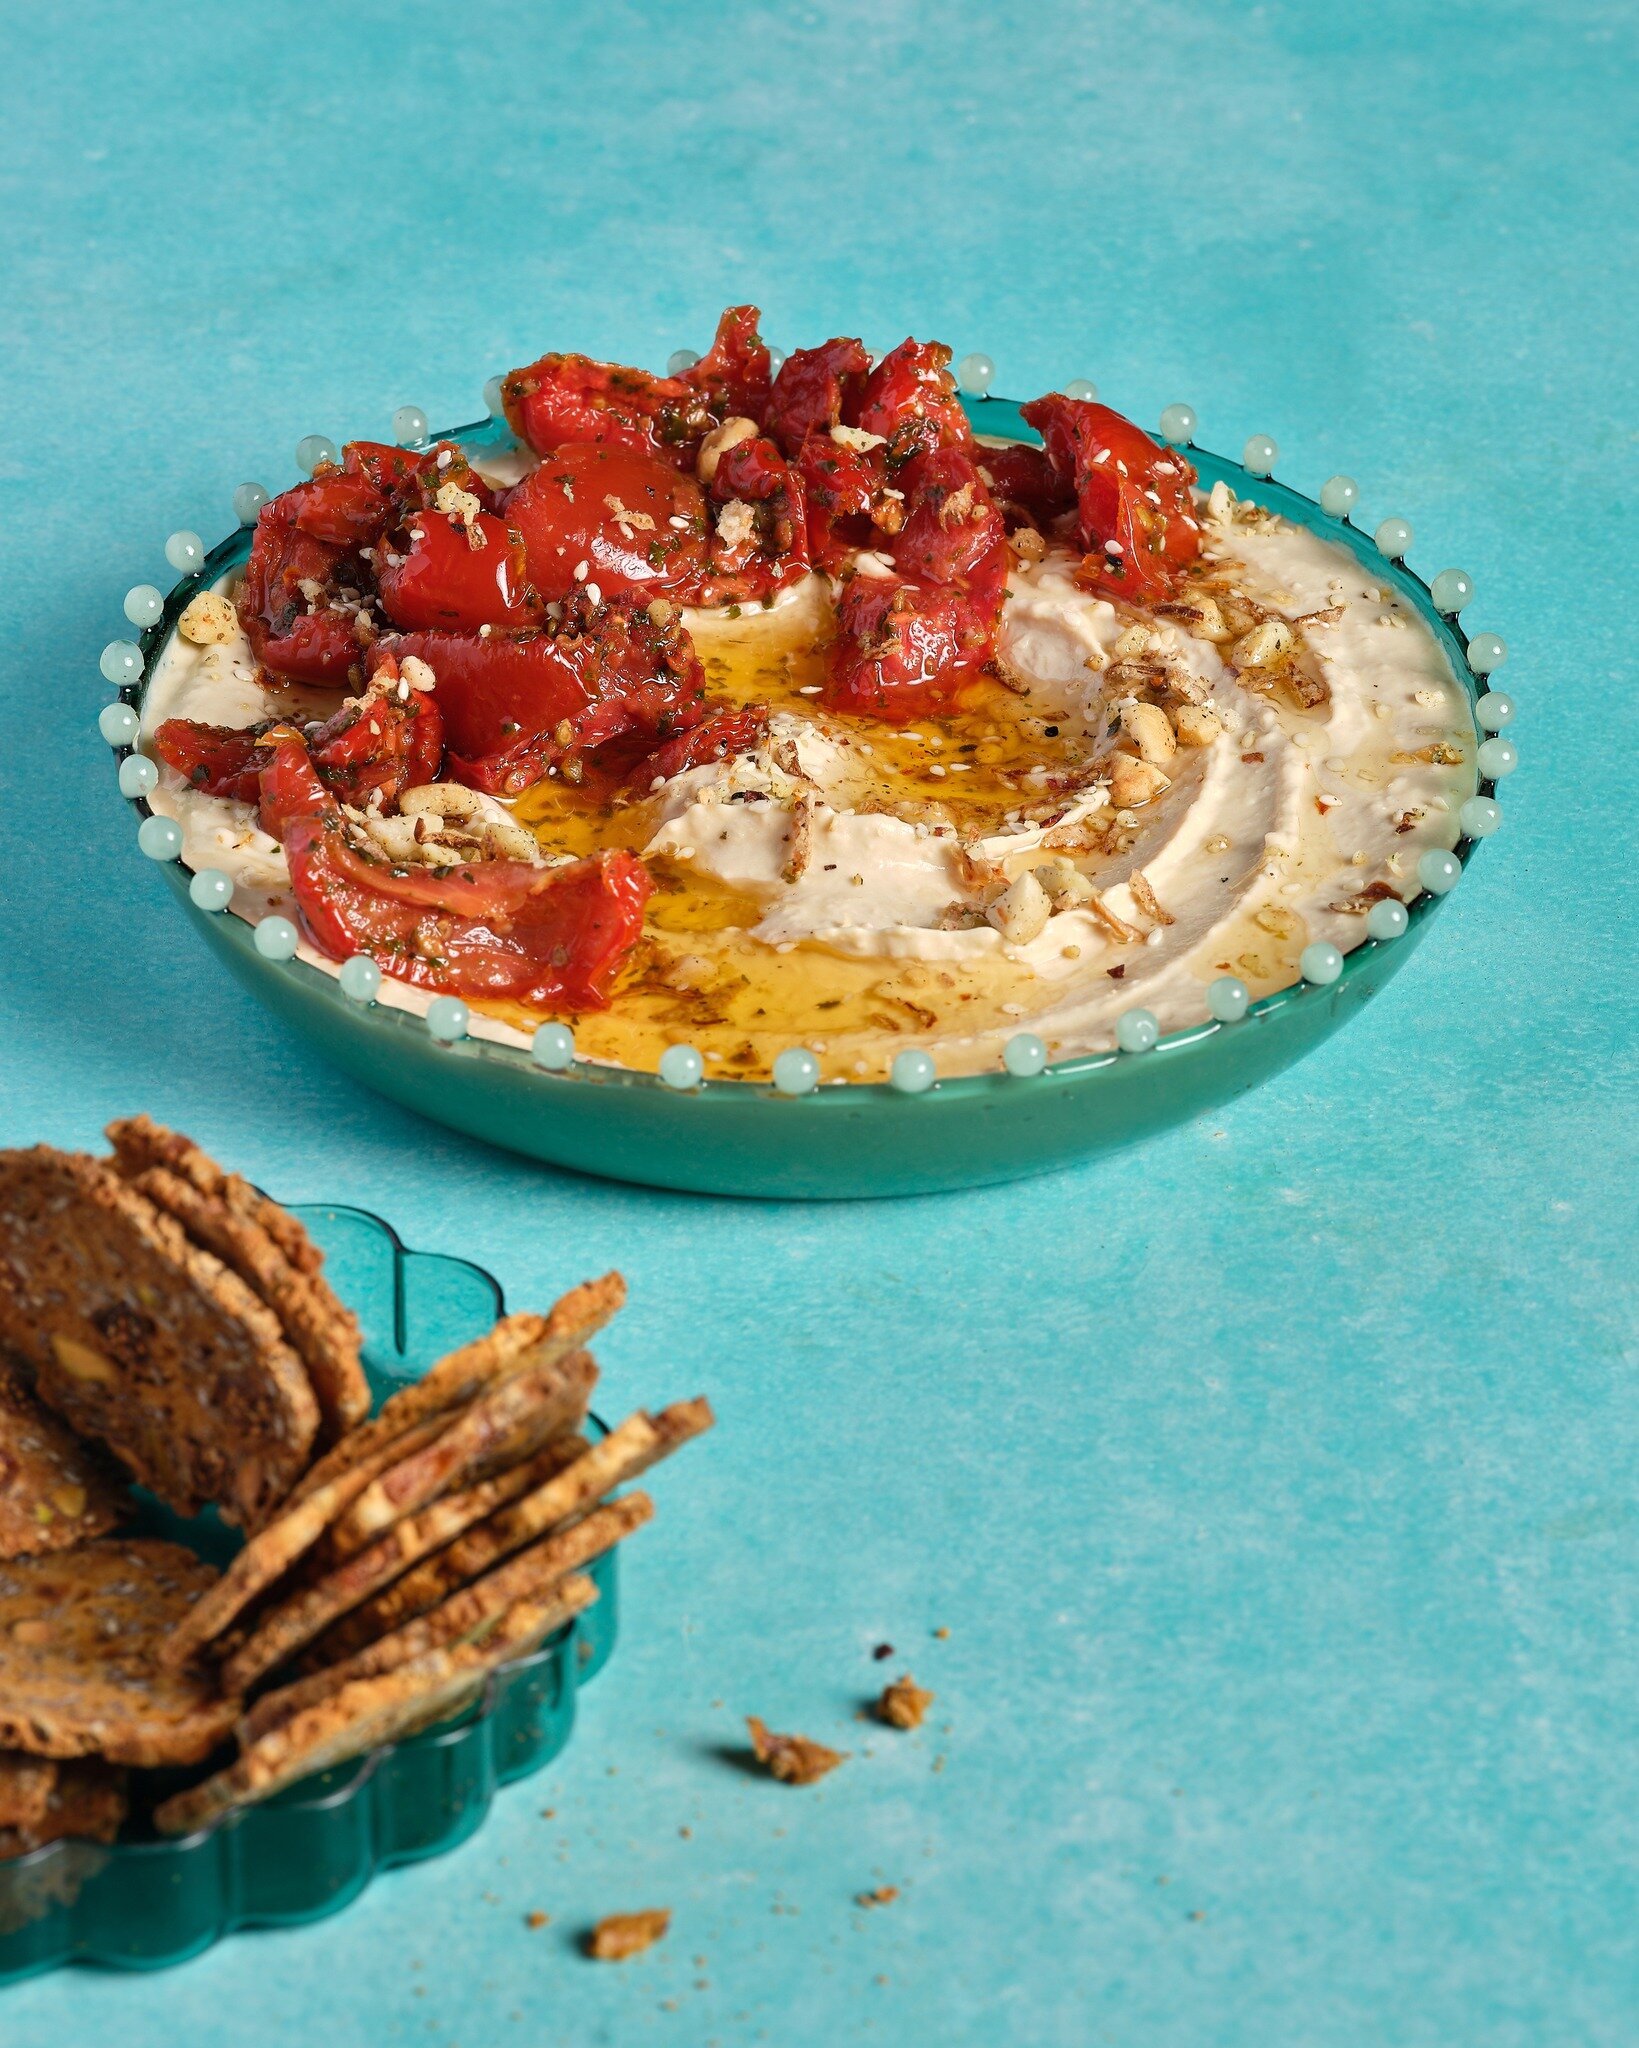 Jazz up your mezze by adding your favourite toppers to our classically creamy Hommus. We're loving this combination of sweet marinated sun-dried tomatoes and spicy dukkah. Sooo delicious you'll be hard pressed not to double dip! 

.

.

.

.

#yumis 